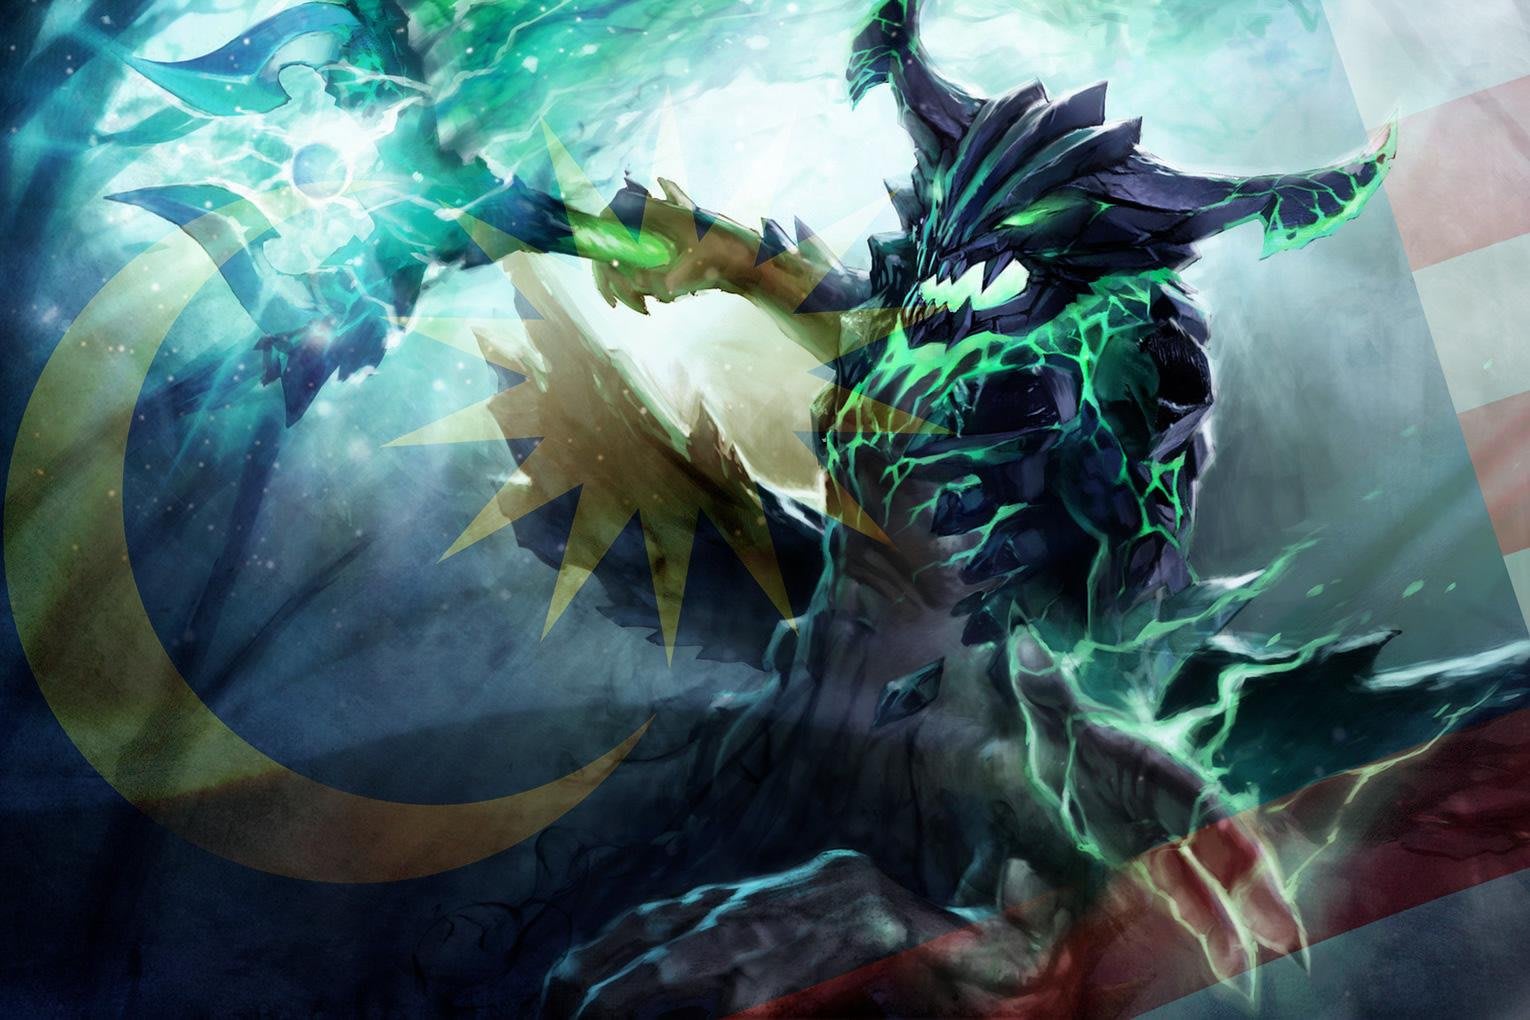 Dota 2 Leaderboards - The Ultimate Bragging Right & Getting There